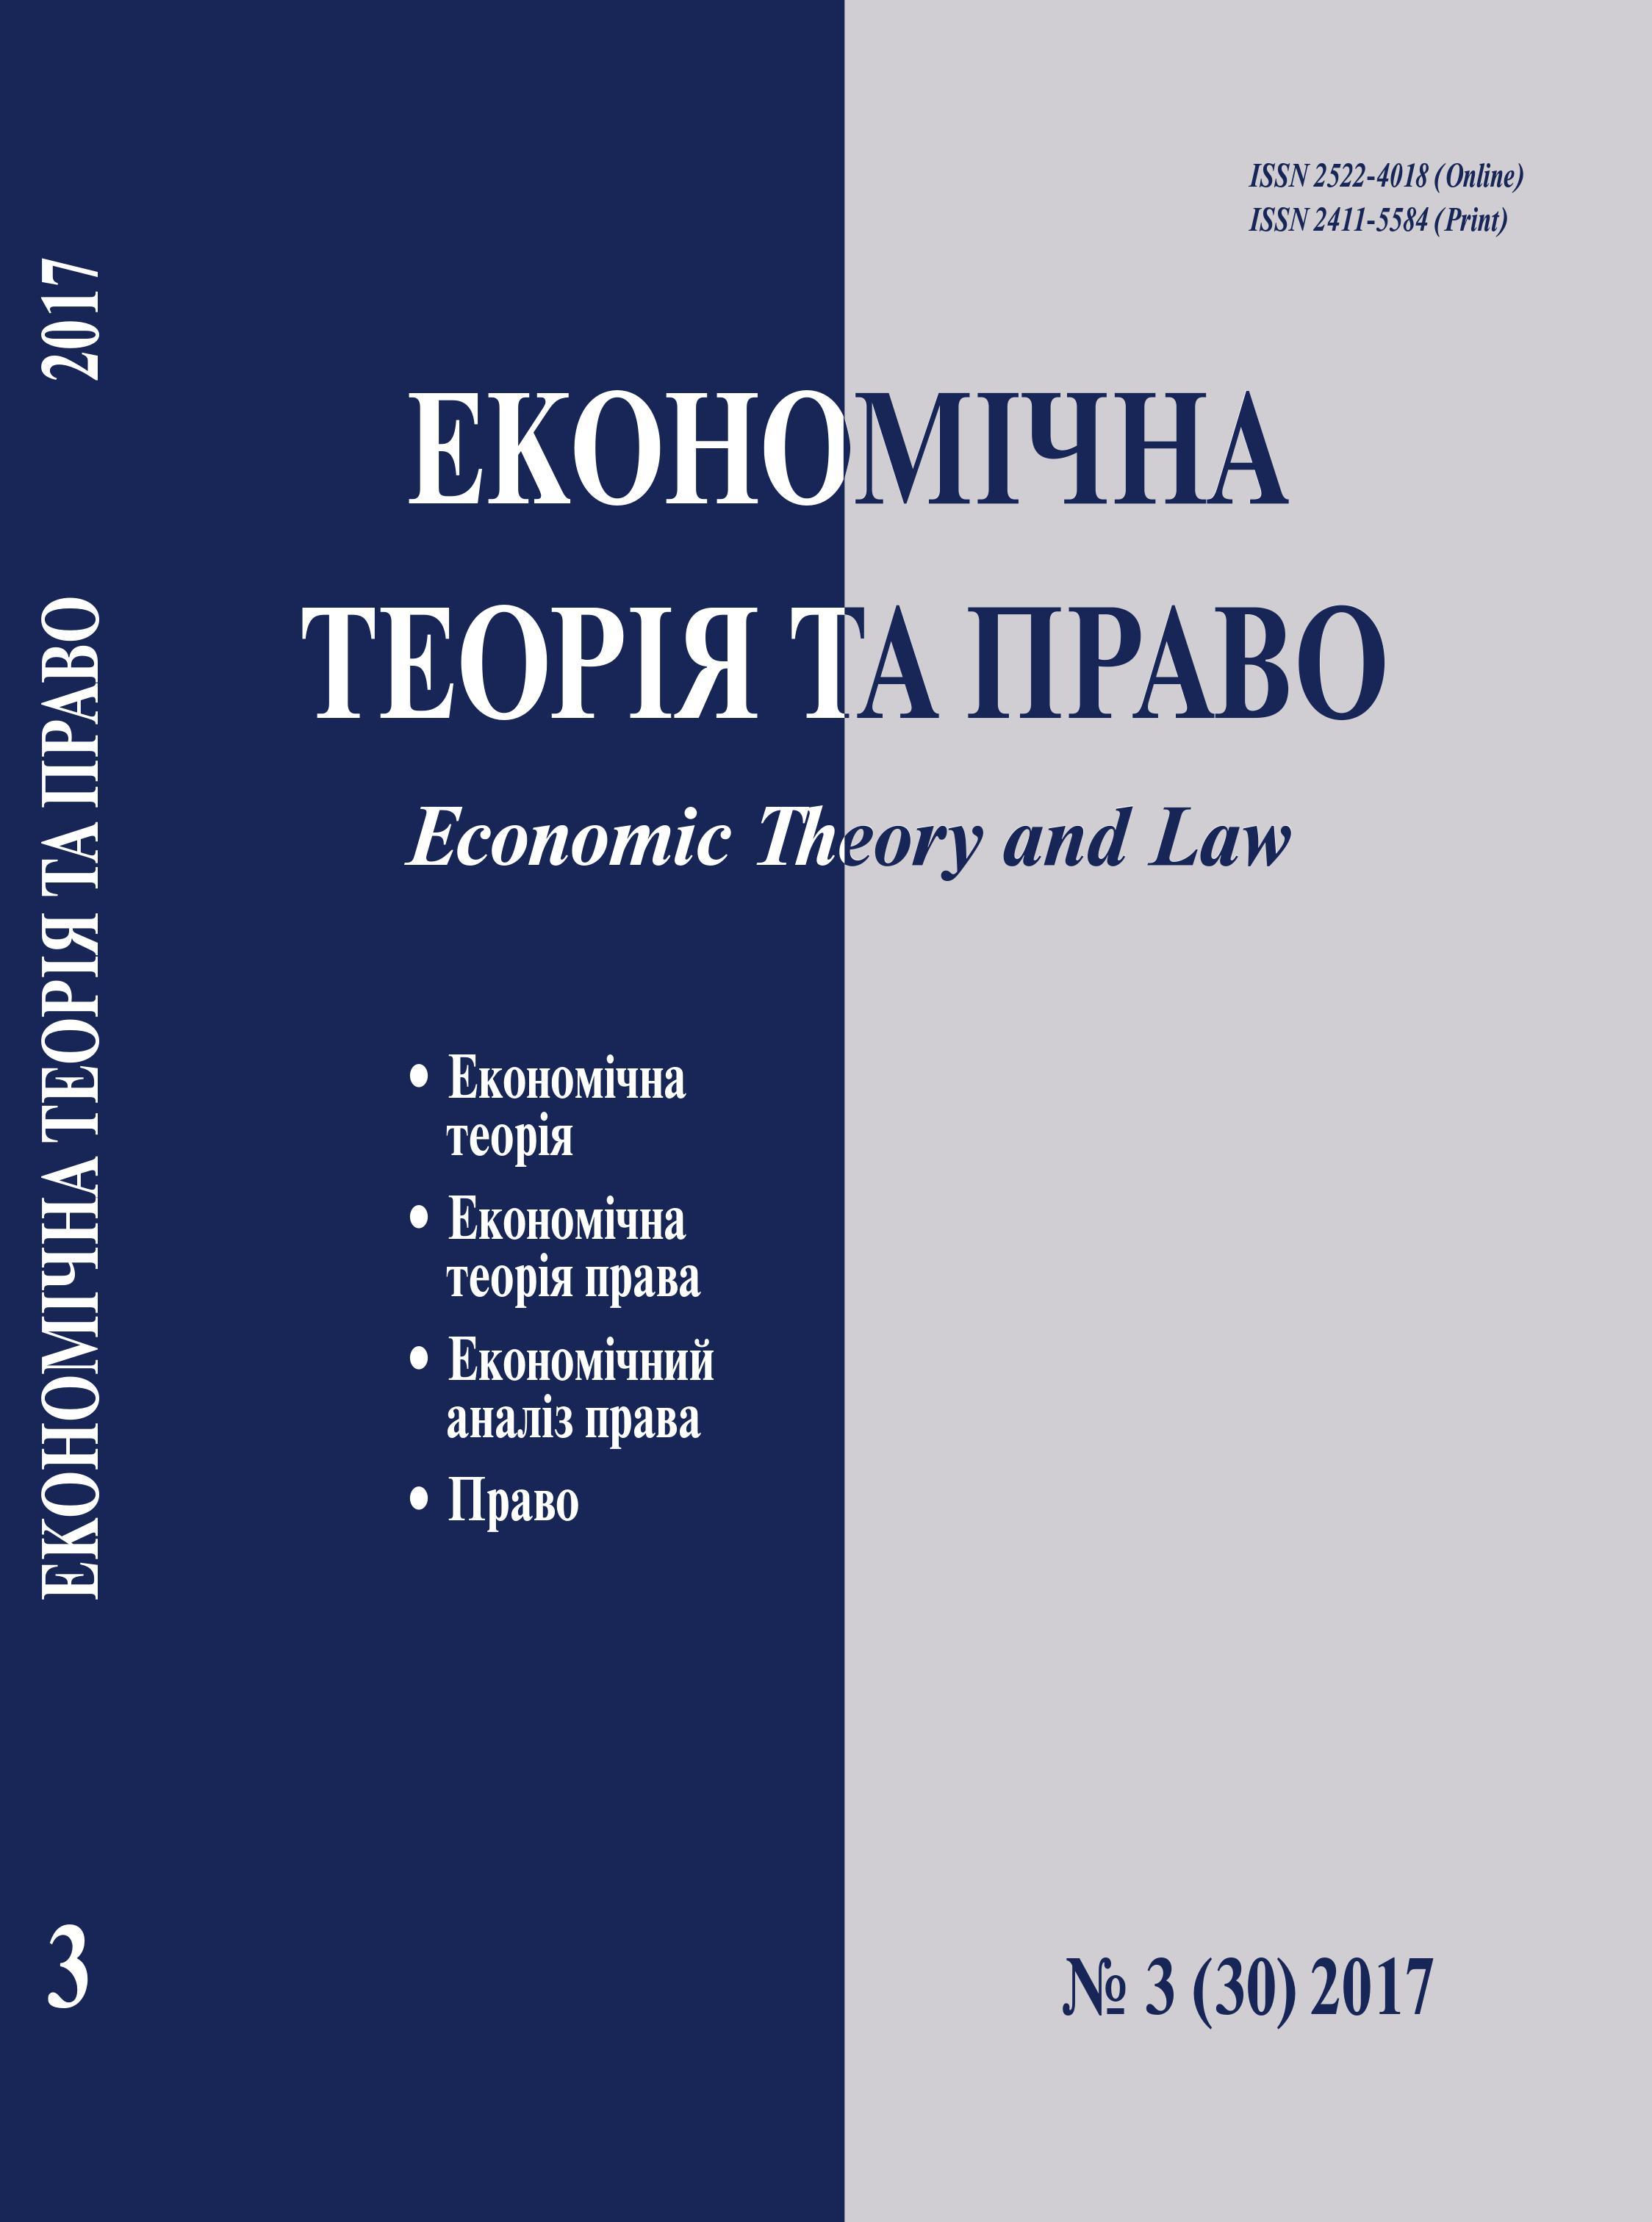 Employment by economic activities in the republic of Moldova and the European union